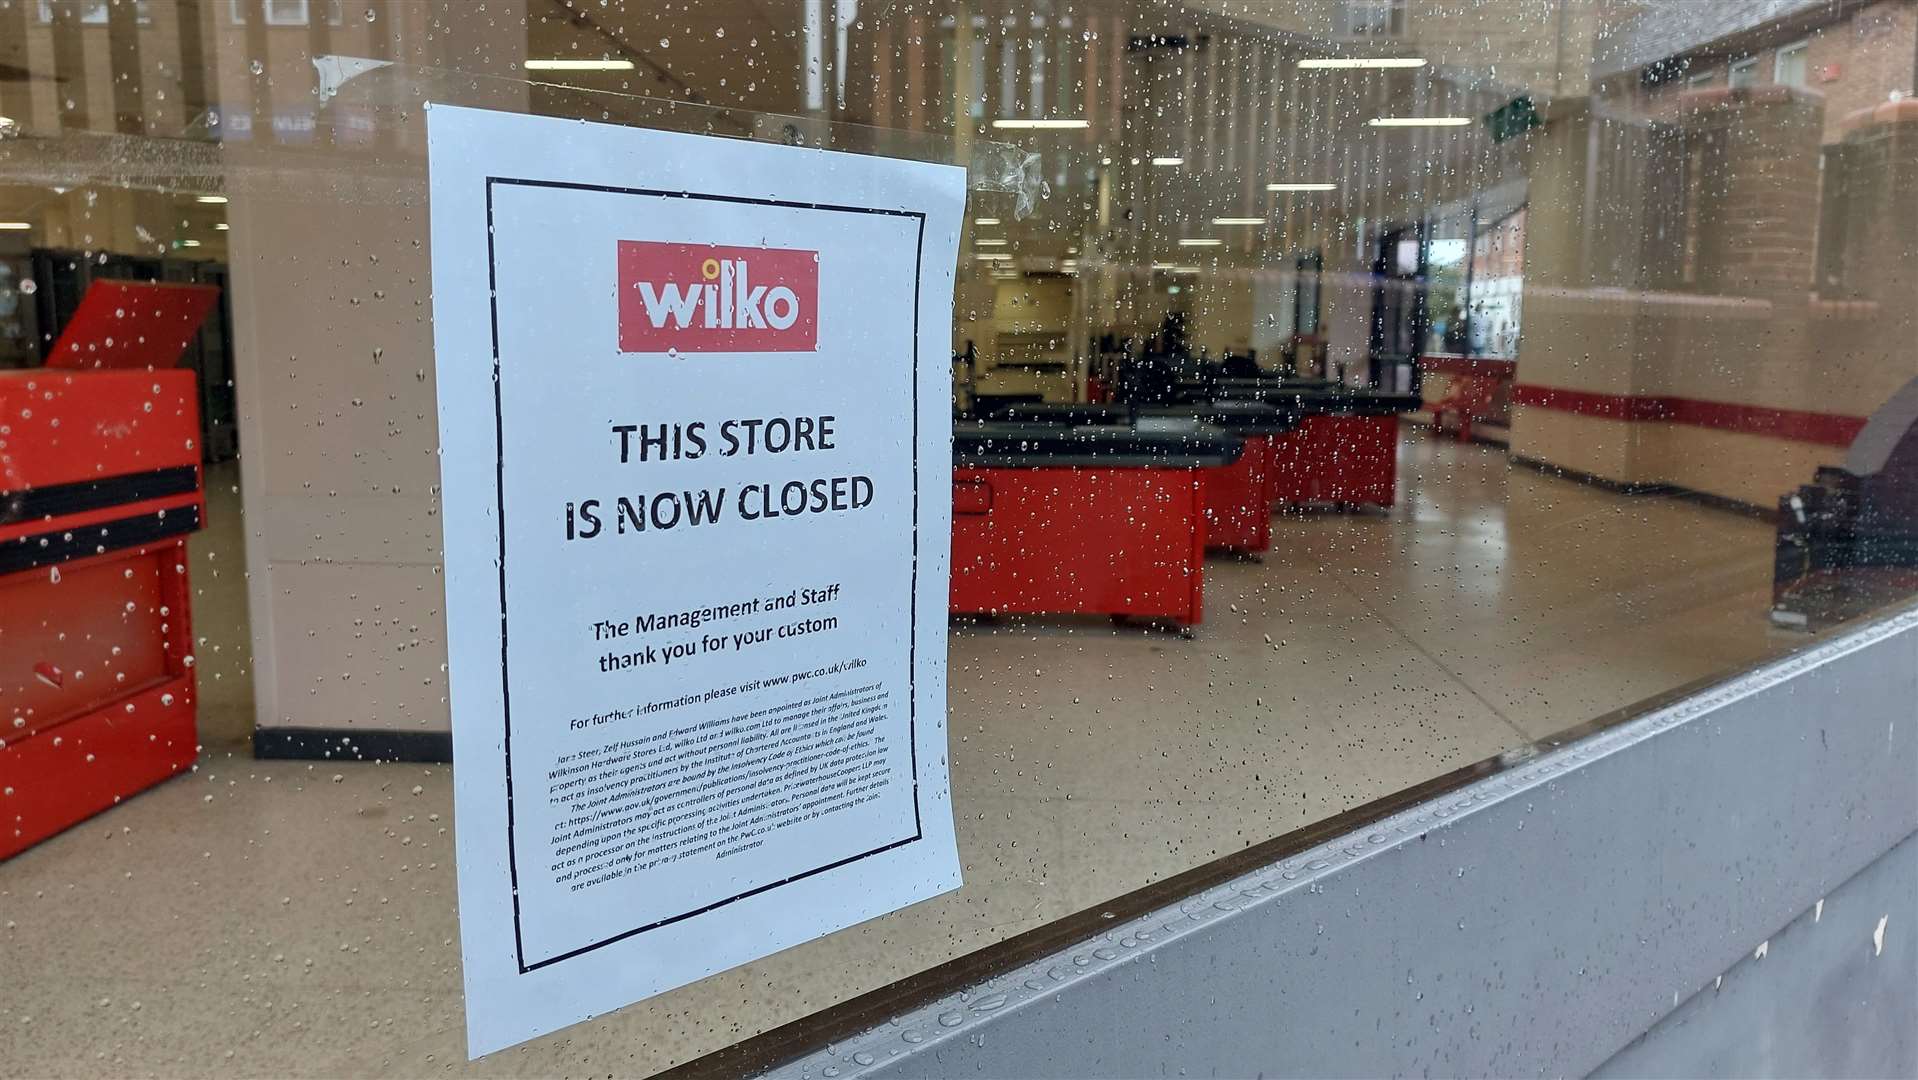 Wilko in Park Mall Ashford has now closed